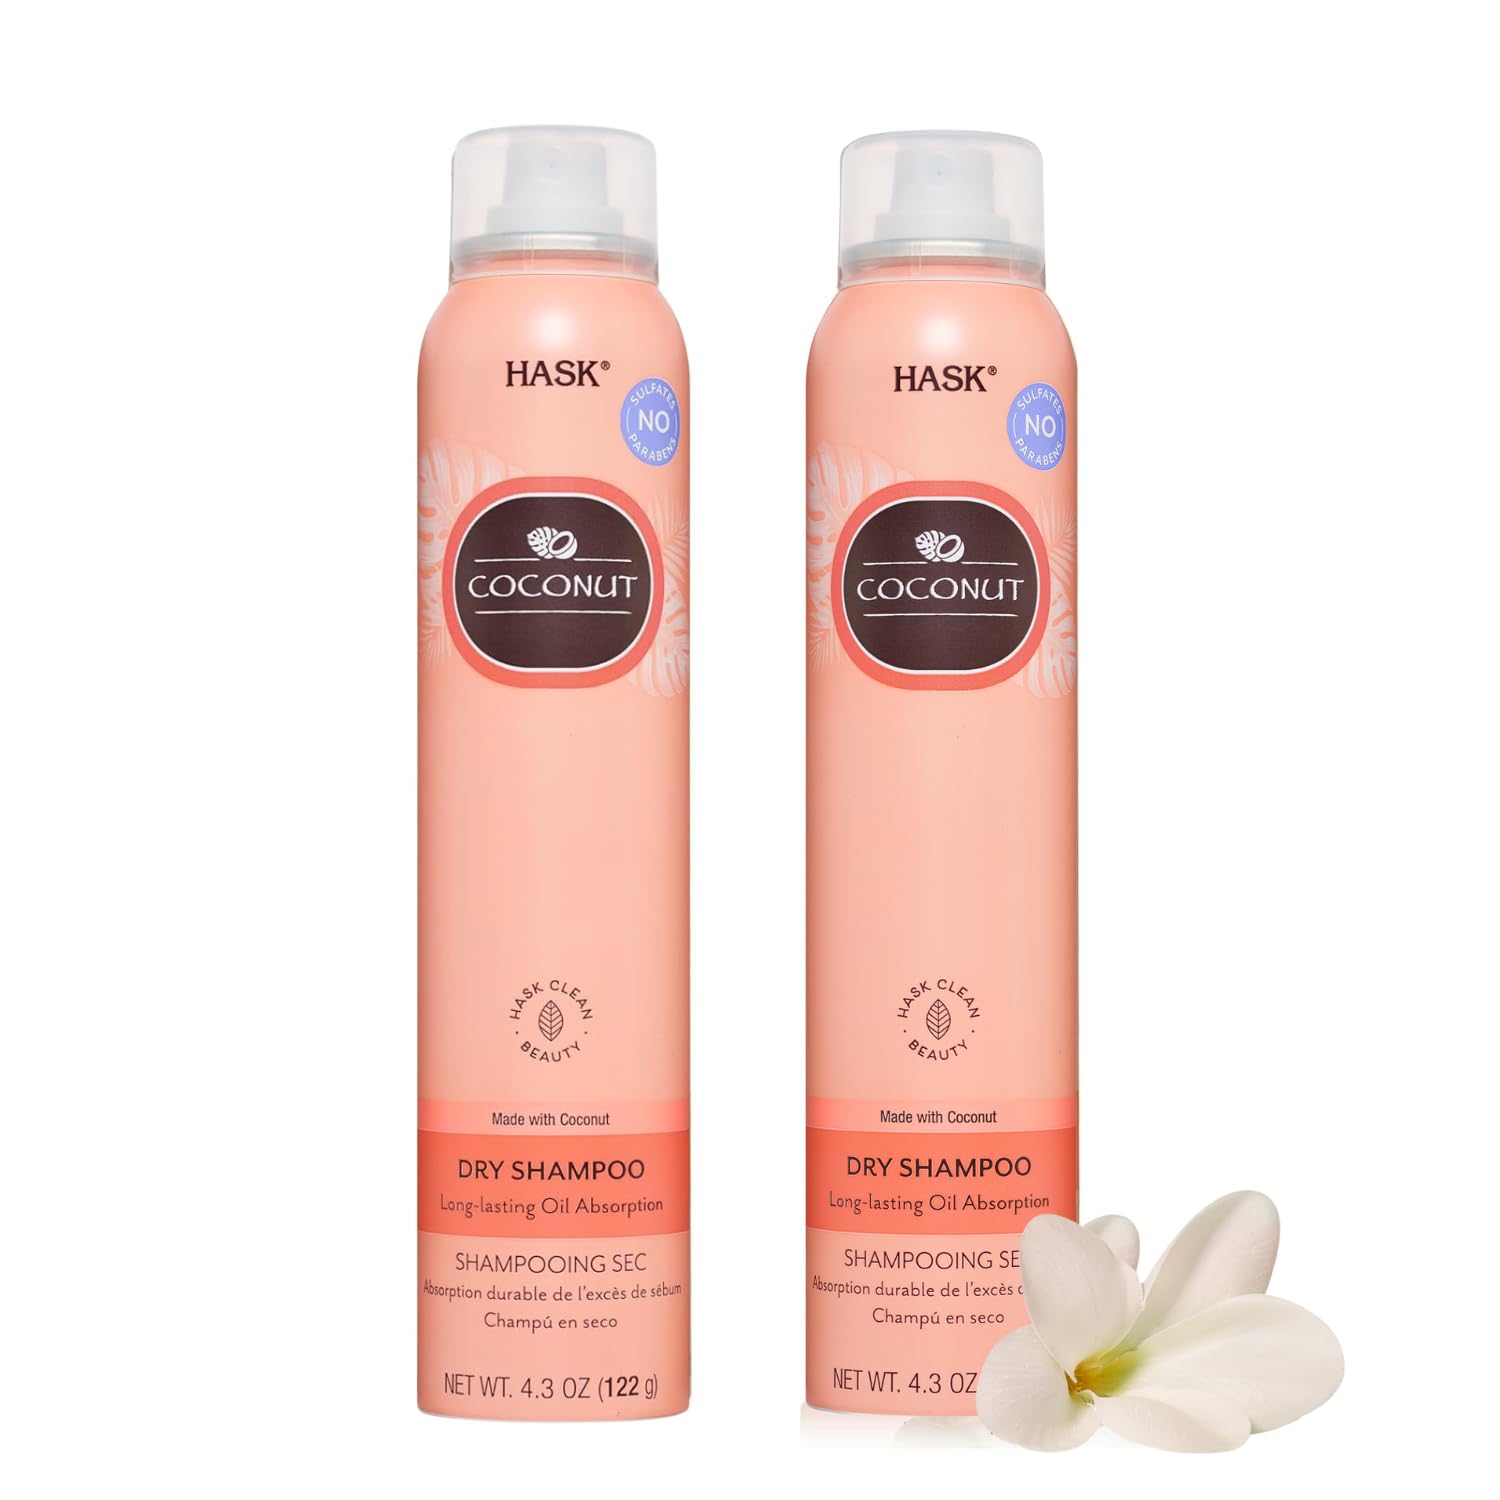 HASK Coconut Collection: 2 Coconut Nourishing Dry Shampoos and 1 Coconut Oil Nourishing Shine Oil